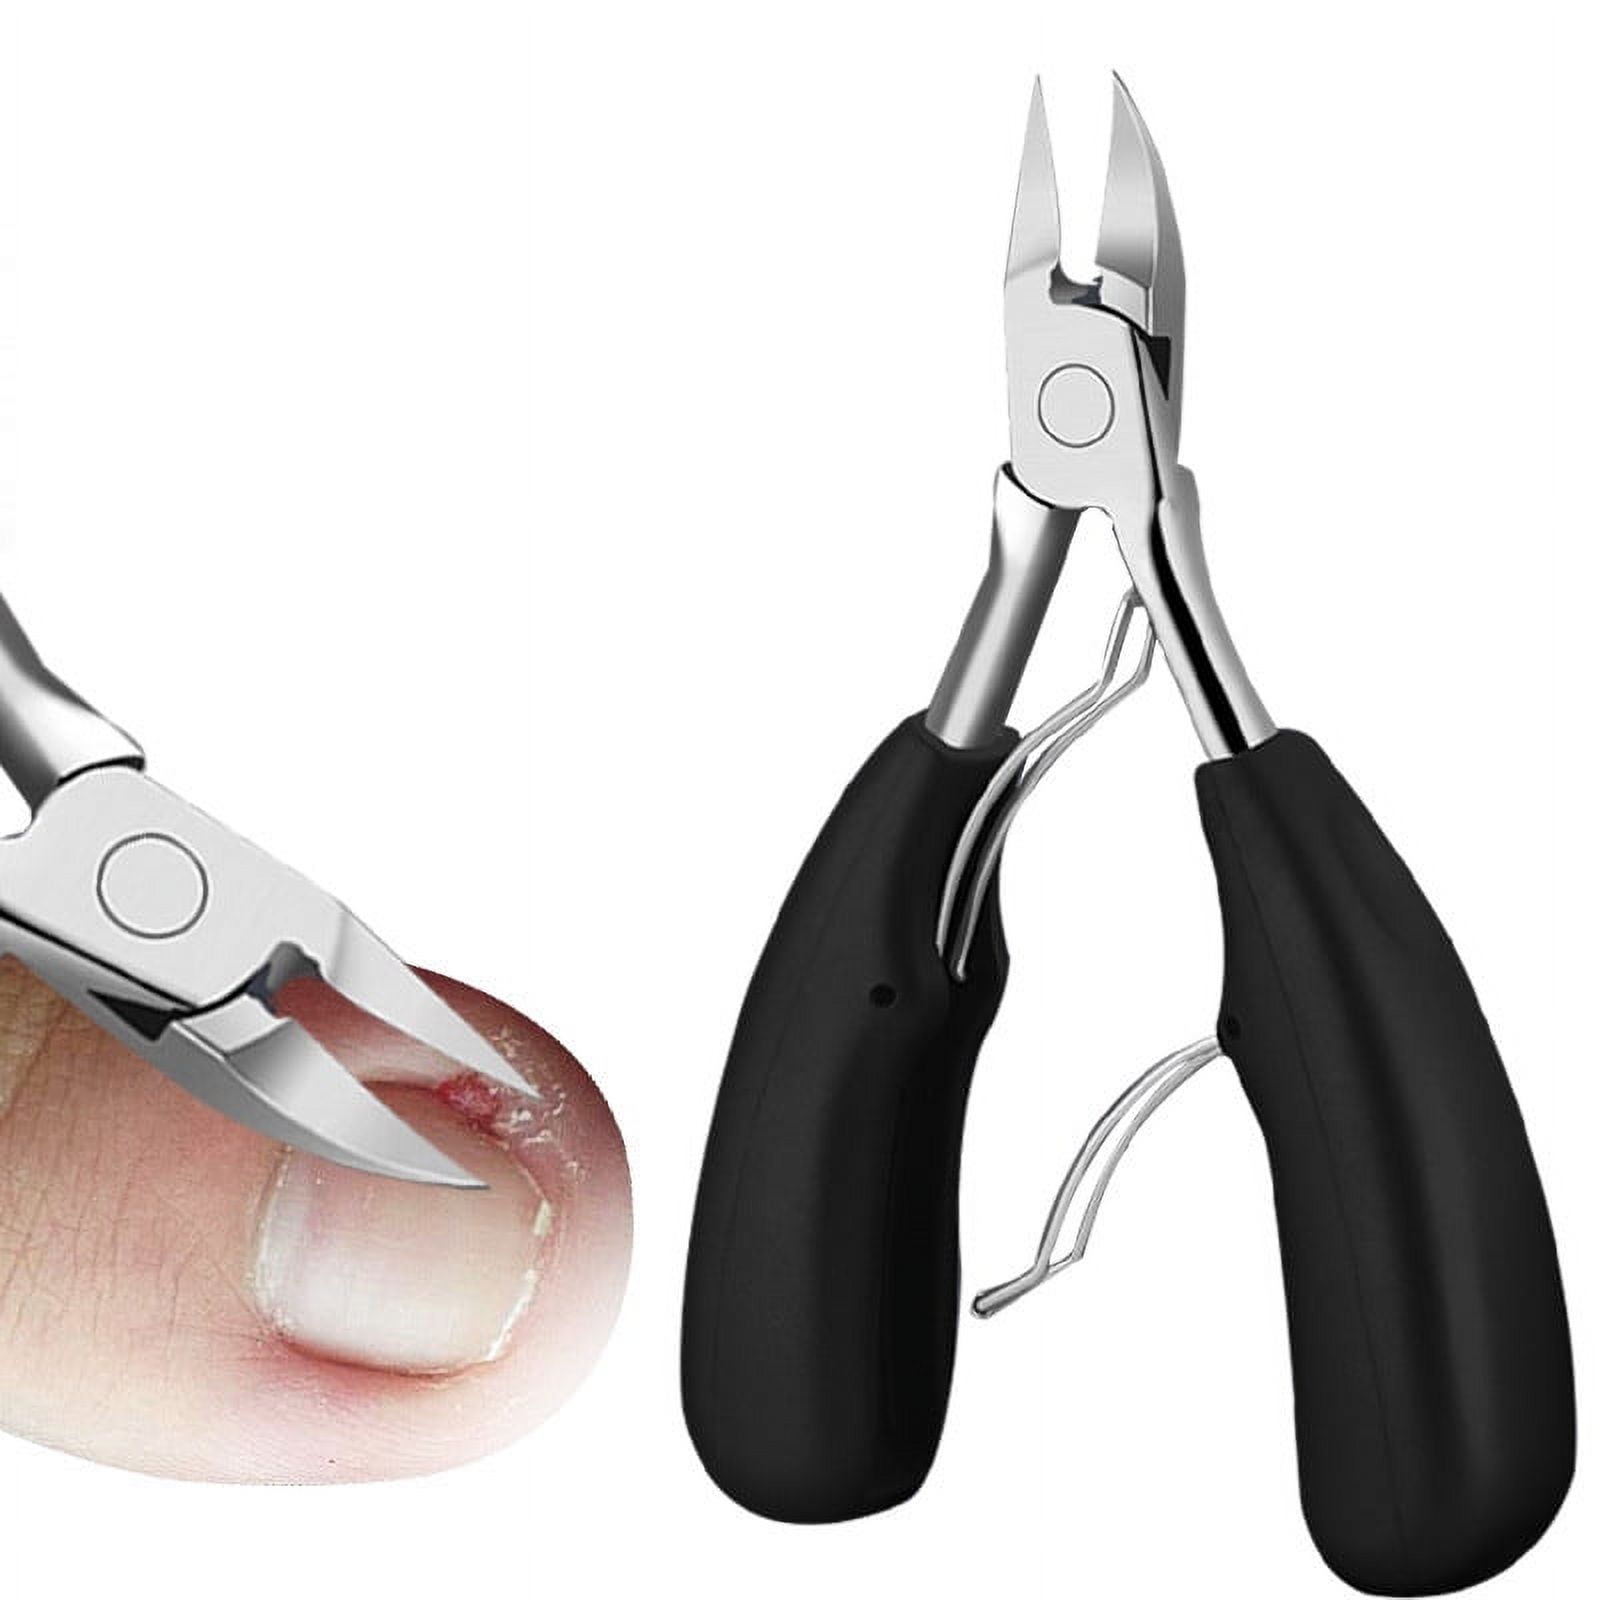 MINI-FACTORY Toe Nail Clipper for Ingrown or Thick Toenails,Toenails Trimmer  and Professional Podiatrist Toenail Nipper with Surgical Stainless Steel  Sharp Blades and Lighter Soft Handle - Black 